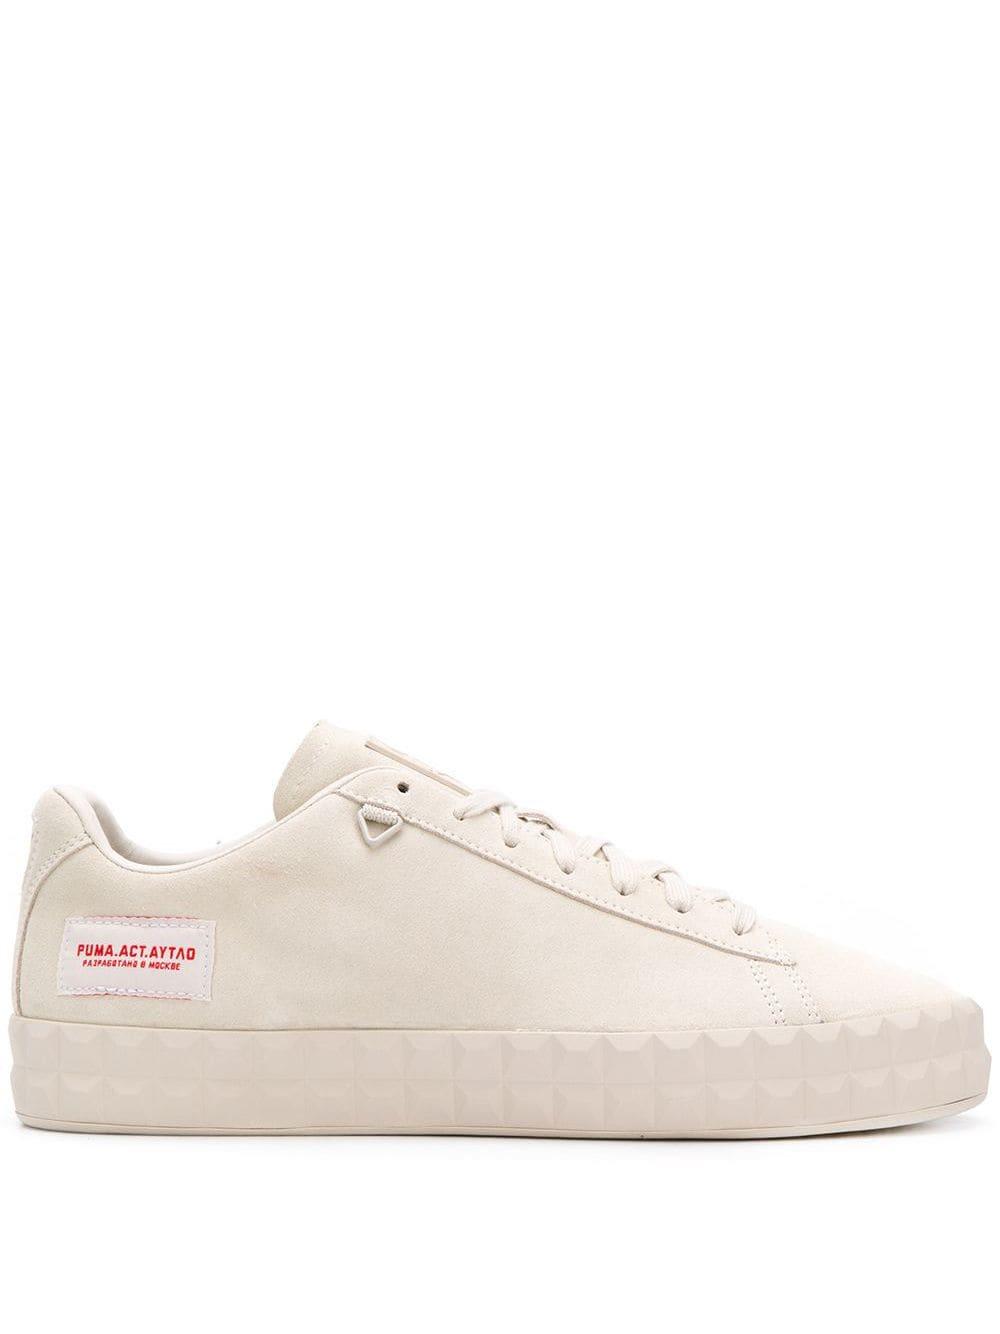 PUMA Suede X Aytao | Outlaw Moscow Court Platform Moonbeam Sneakers in  White for Men - Lyst